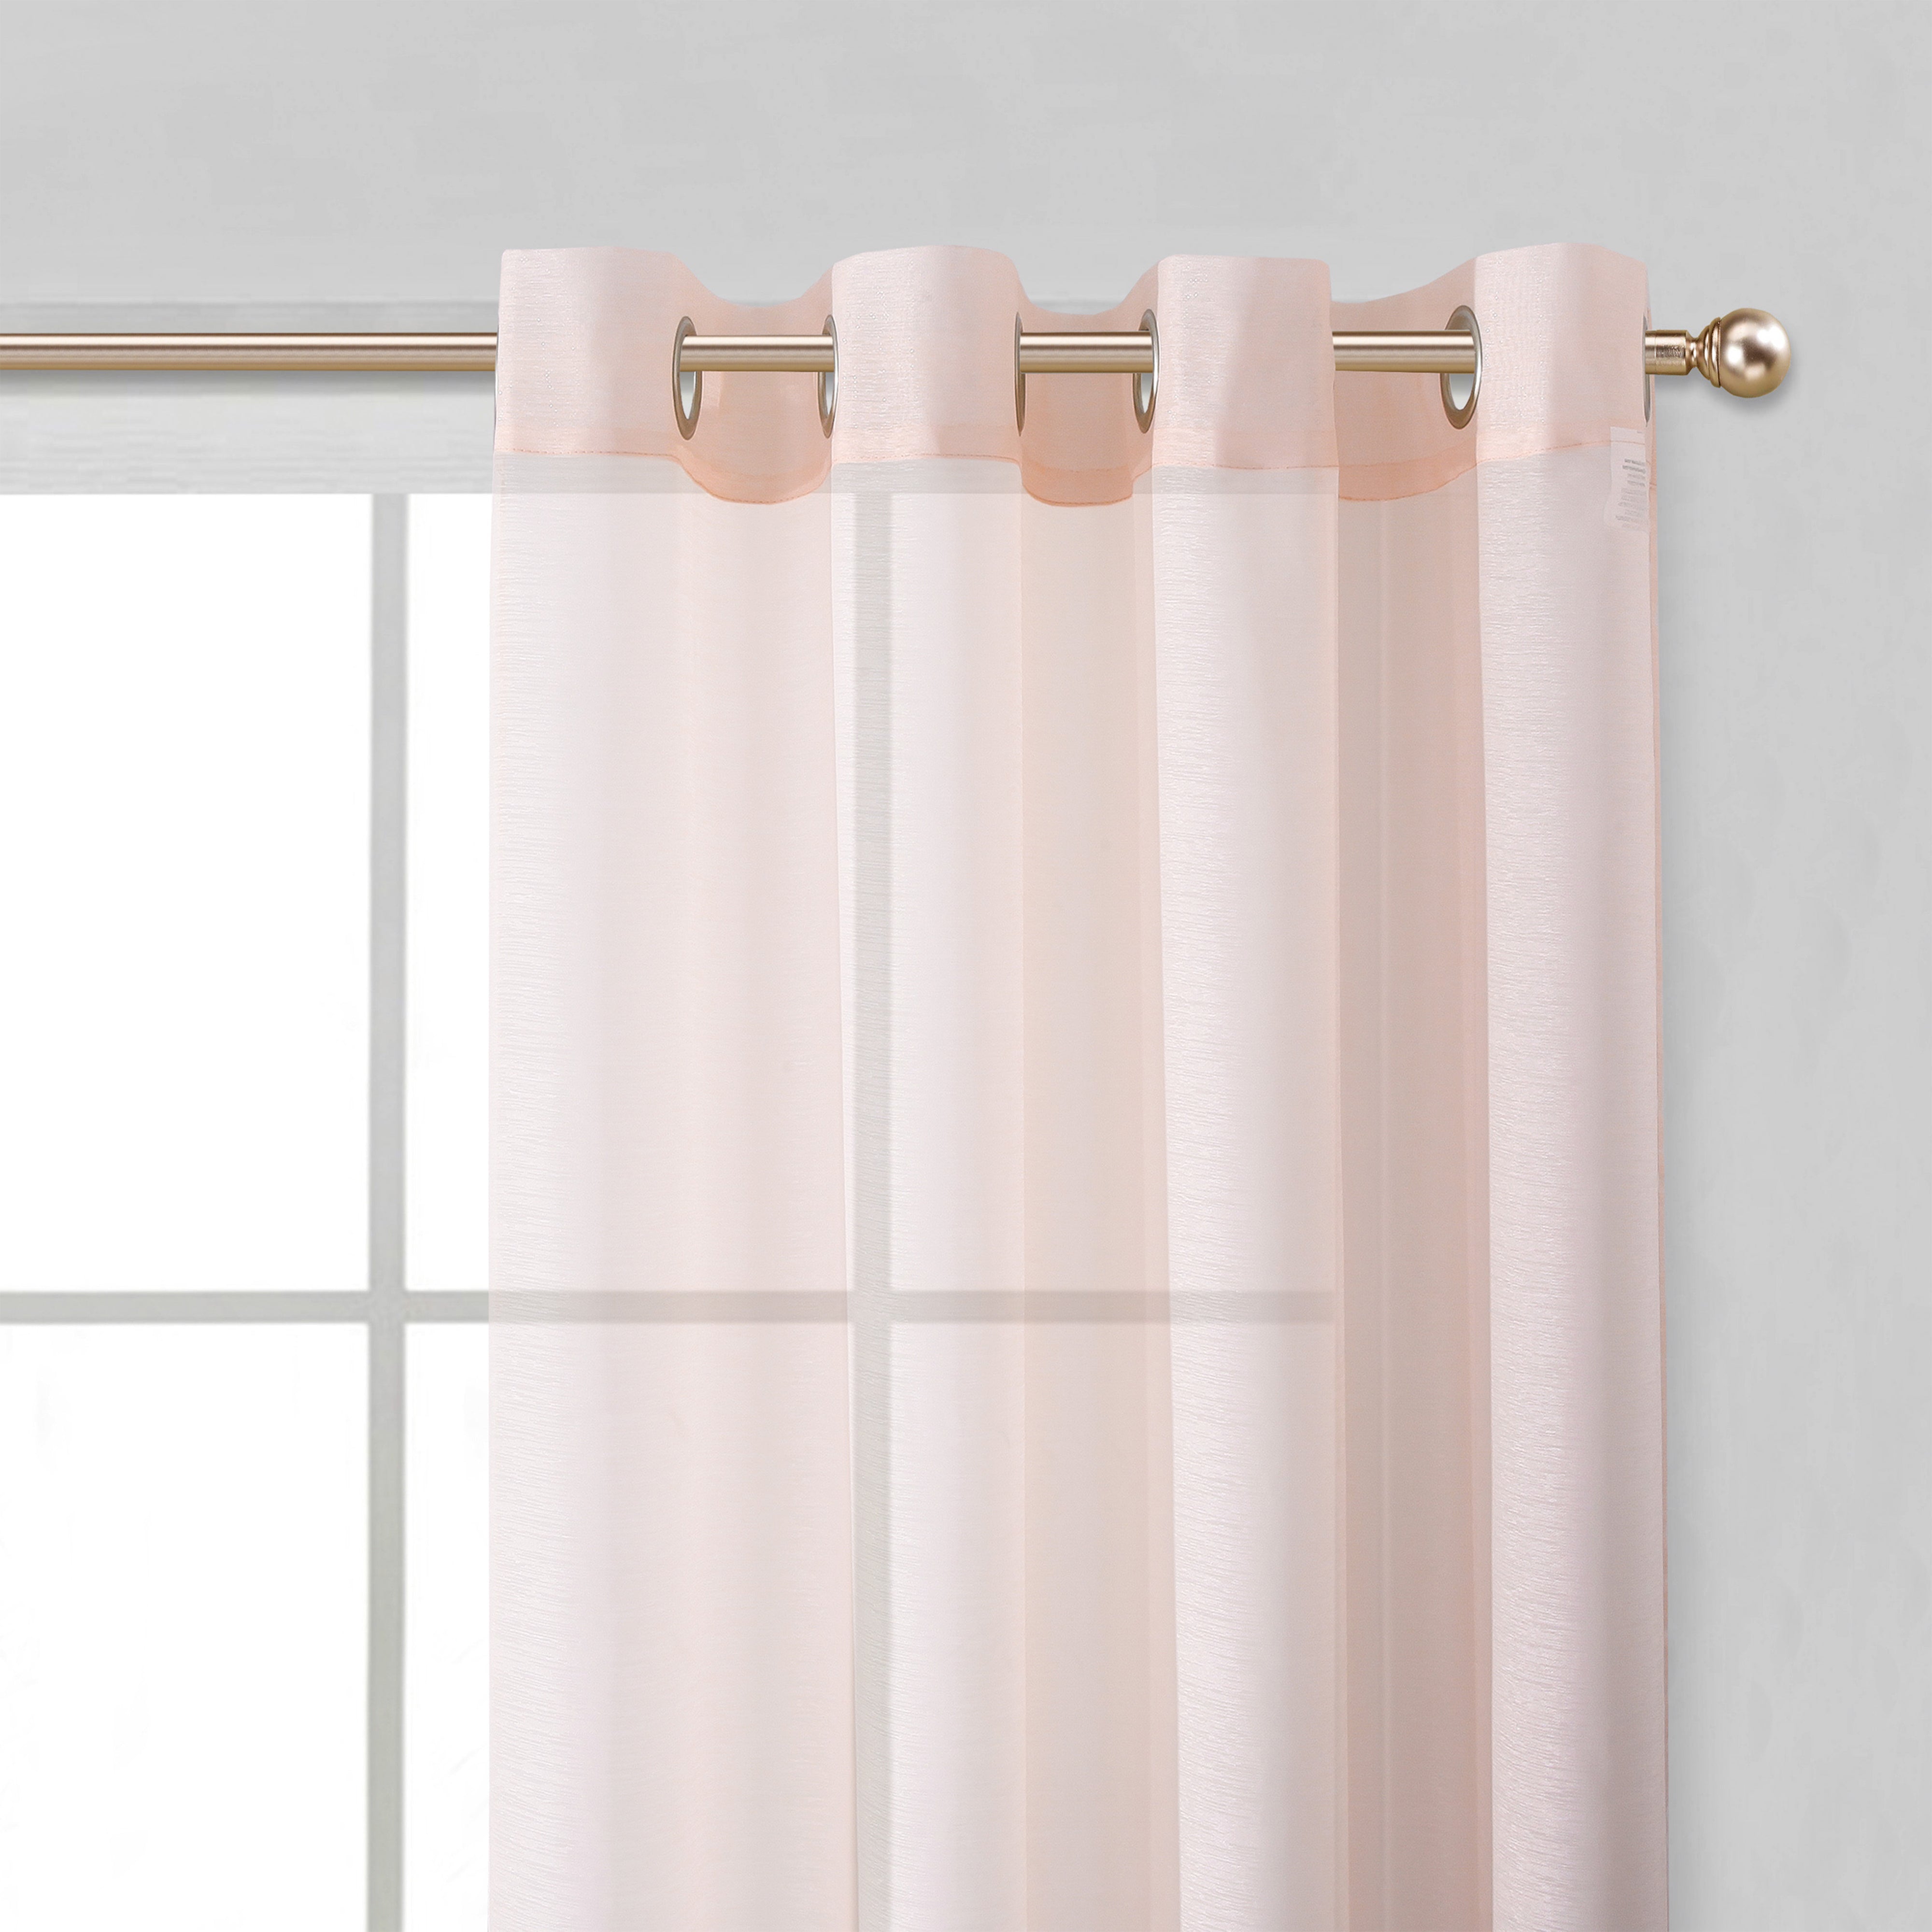 Dainty Home Malibu Solid Airy & Breathable Semi-Sheer Light Filtering Extra Wide Grommet Panel Pair